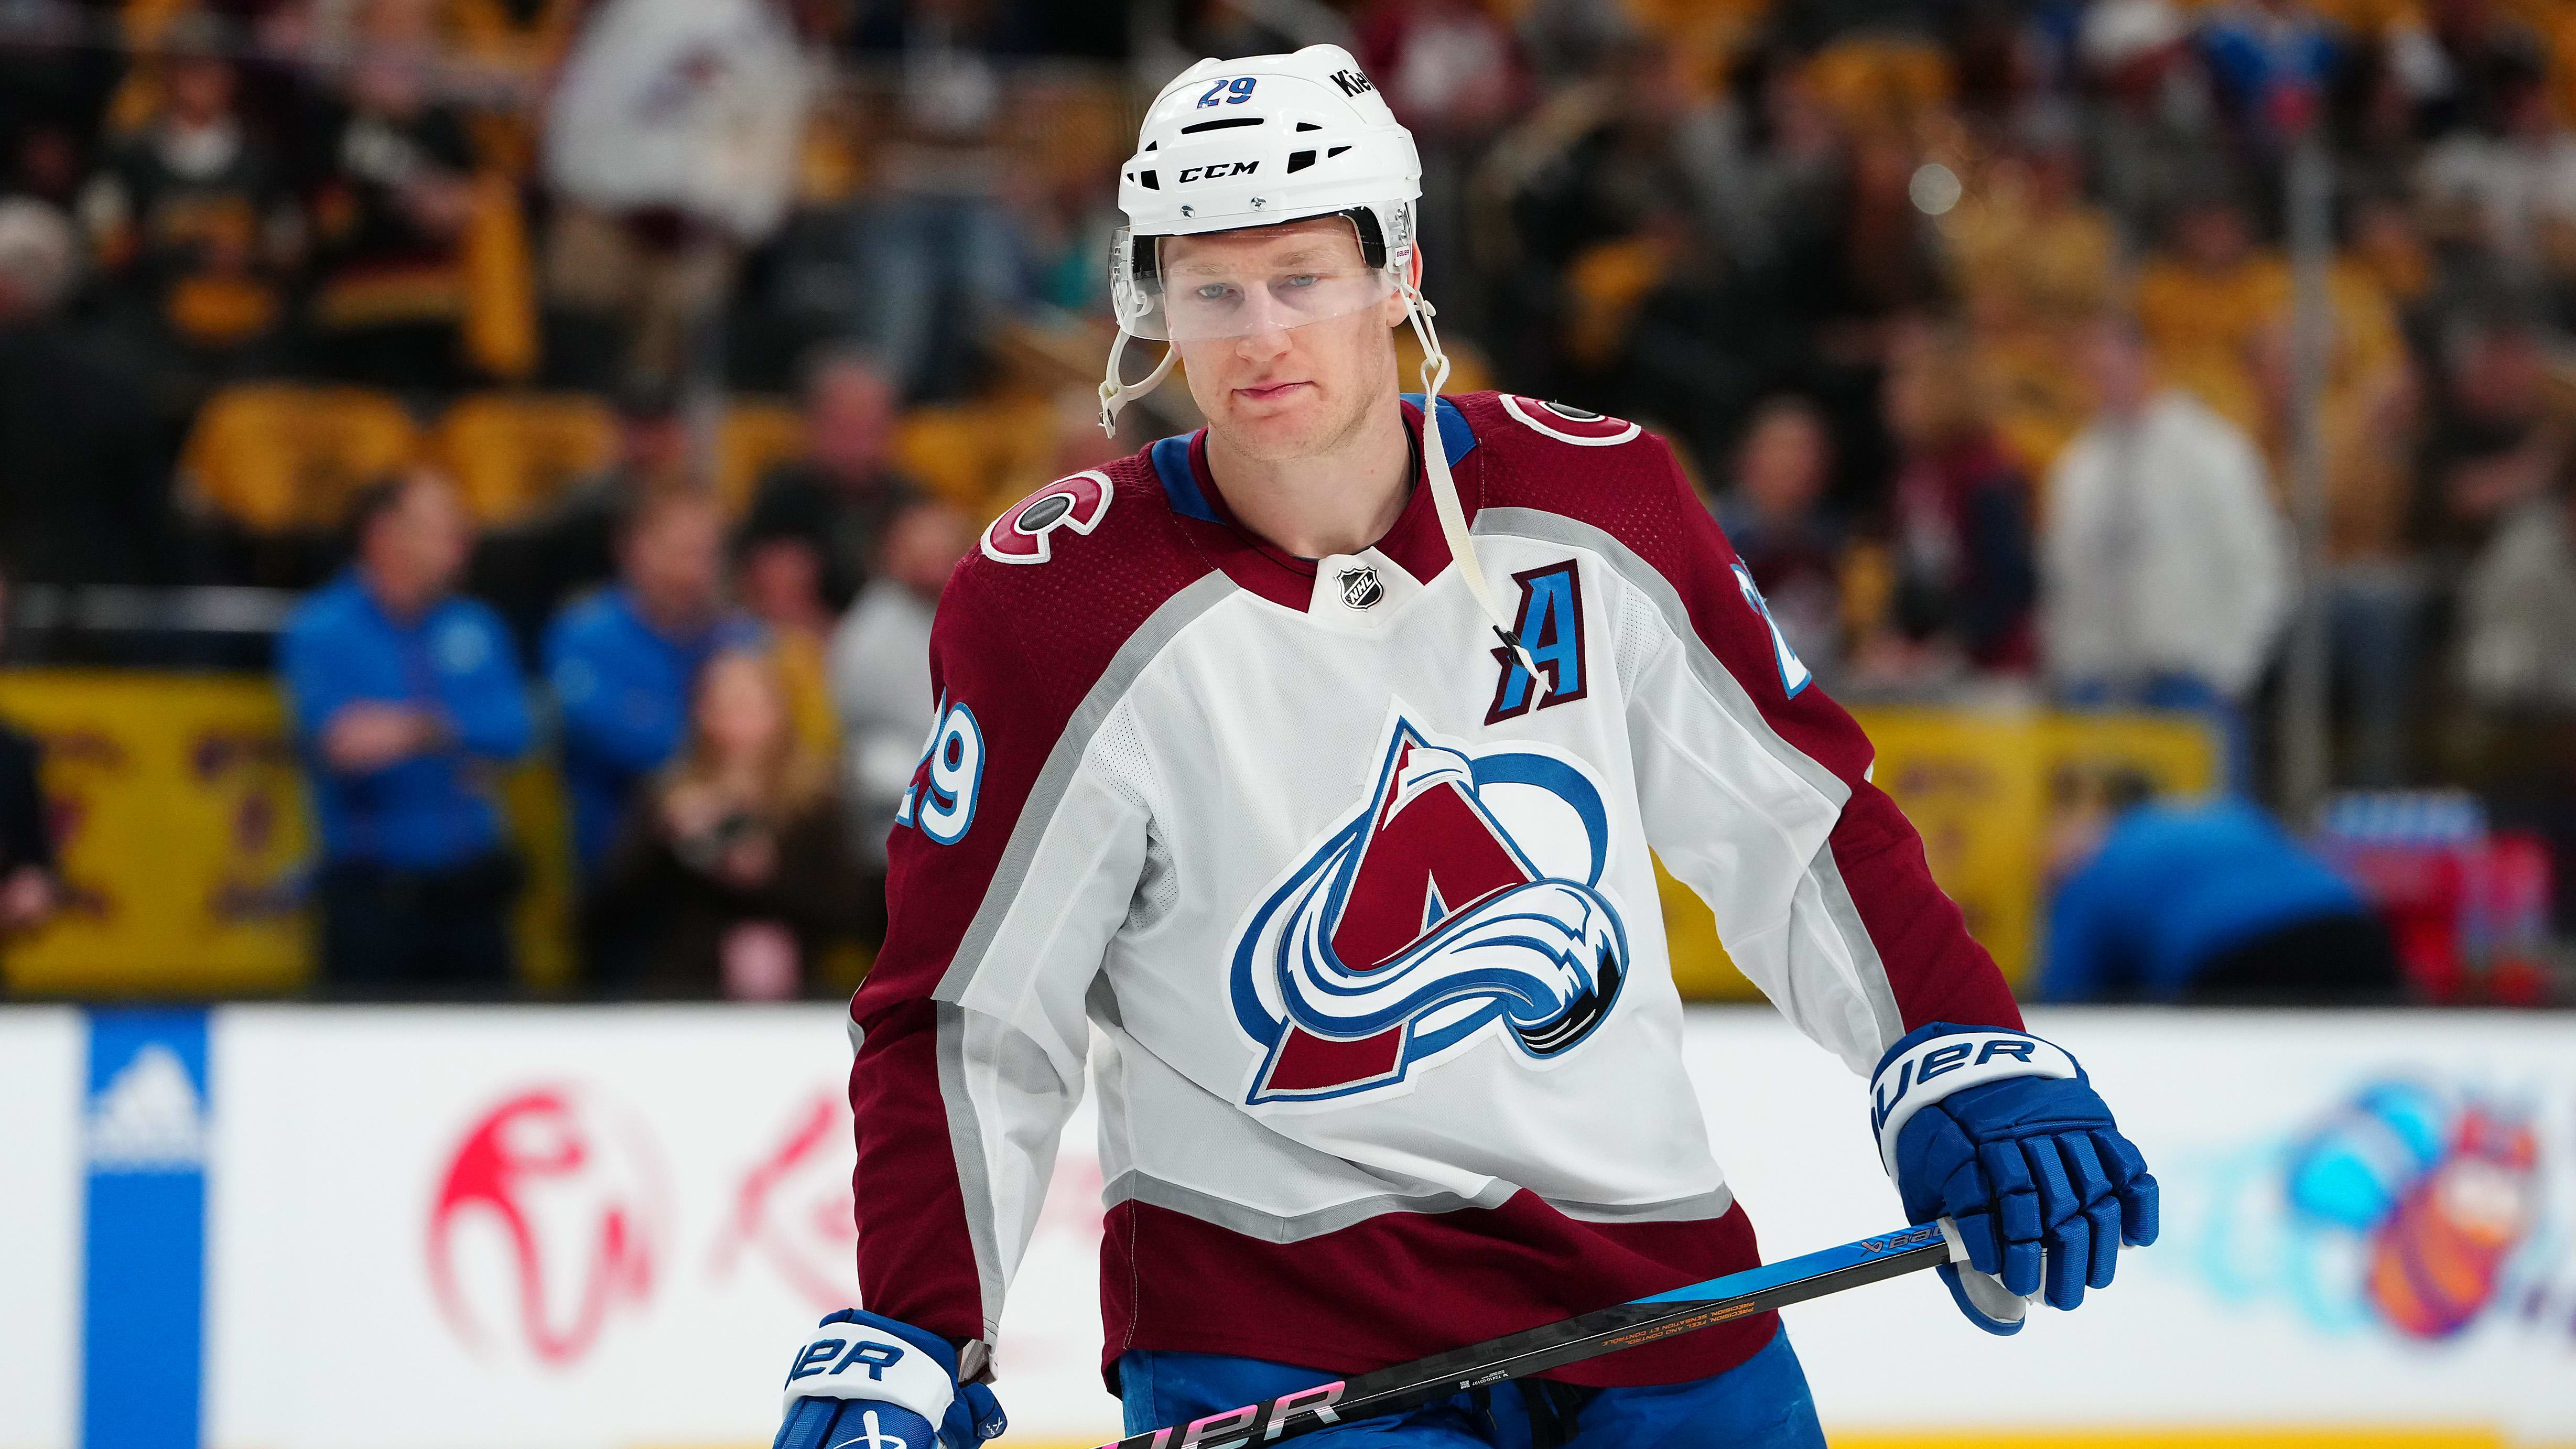 Two-time NHL All-Star Nathan MacKinnon